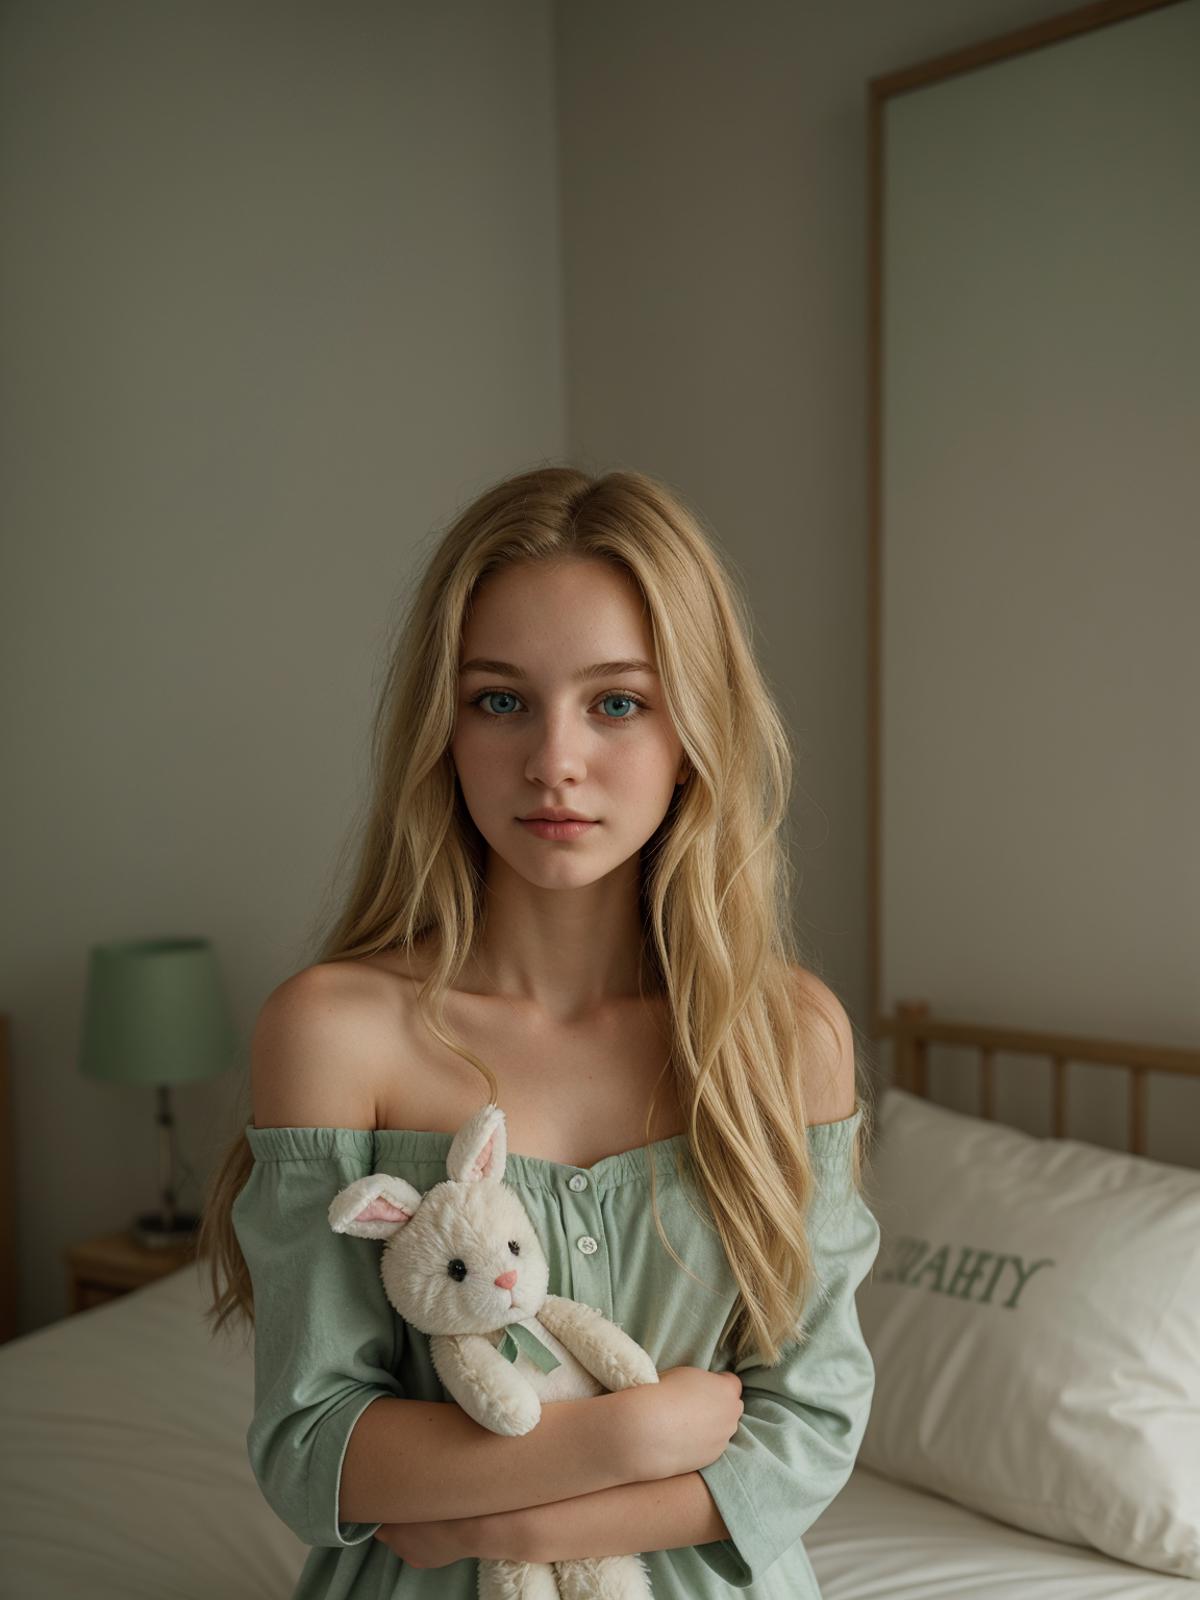 A woman holding a stuffed rabbit in a bedroom.